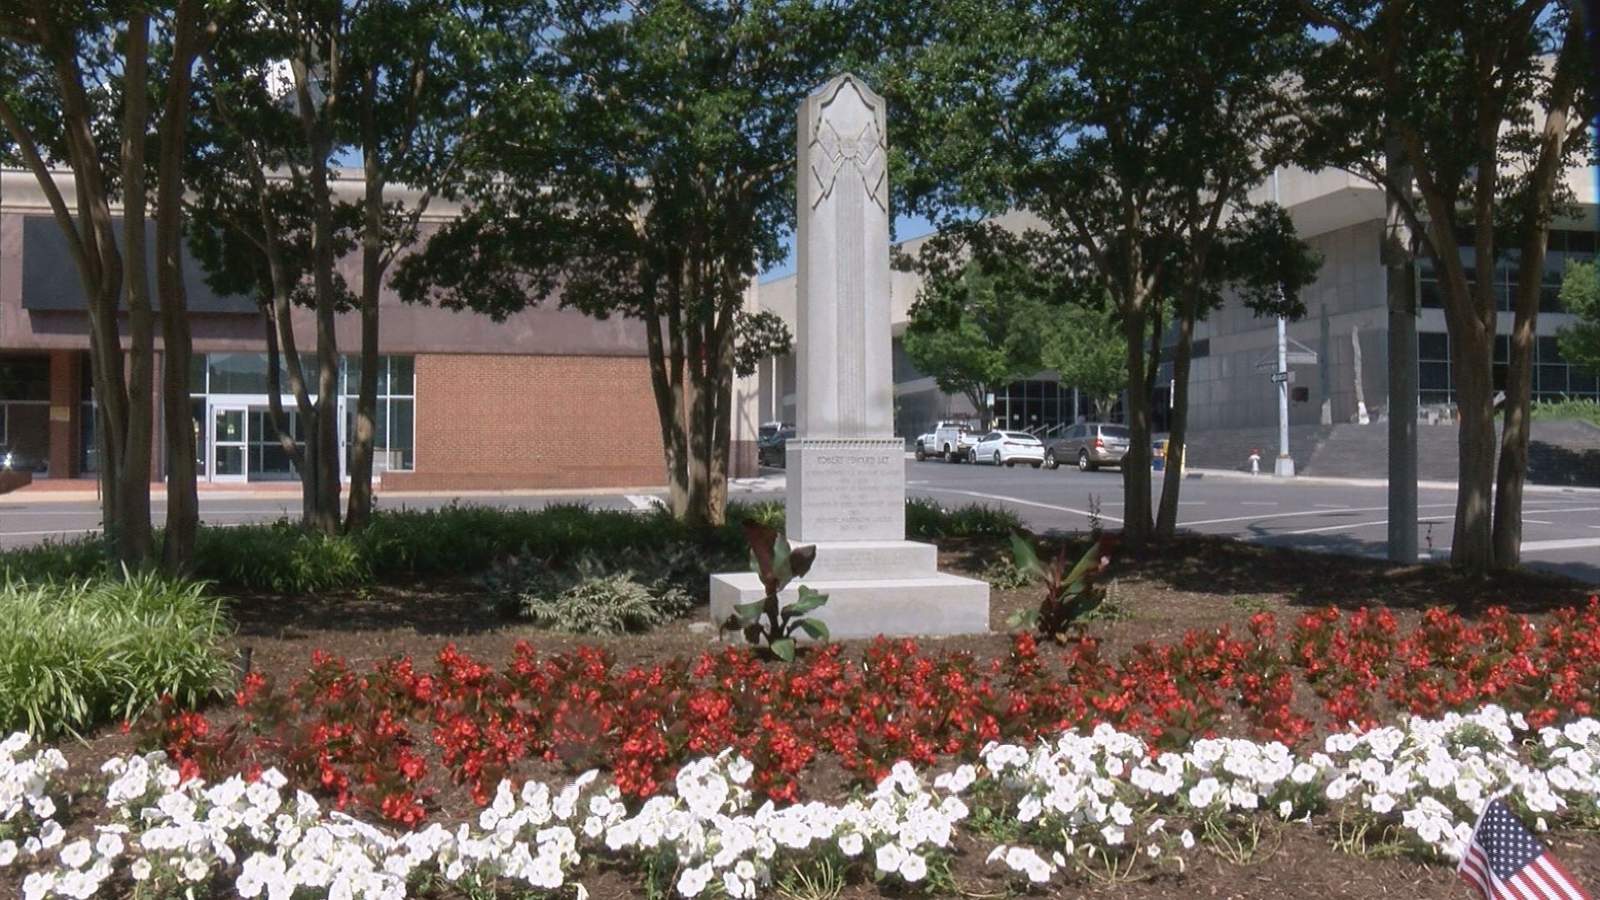 Roanoke City Council takes first step to possibly remove city’s Robert E. Lee monument